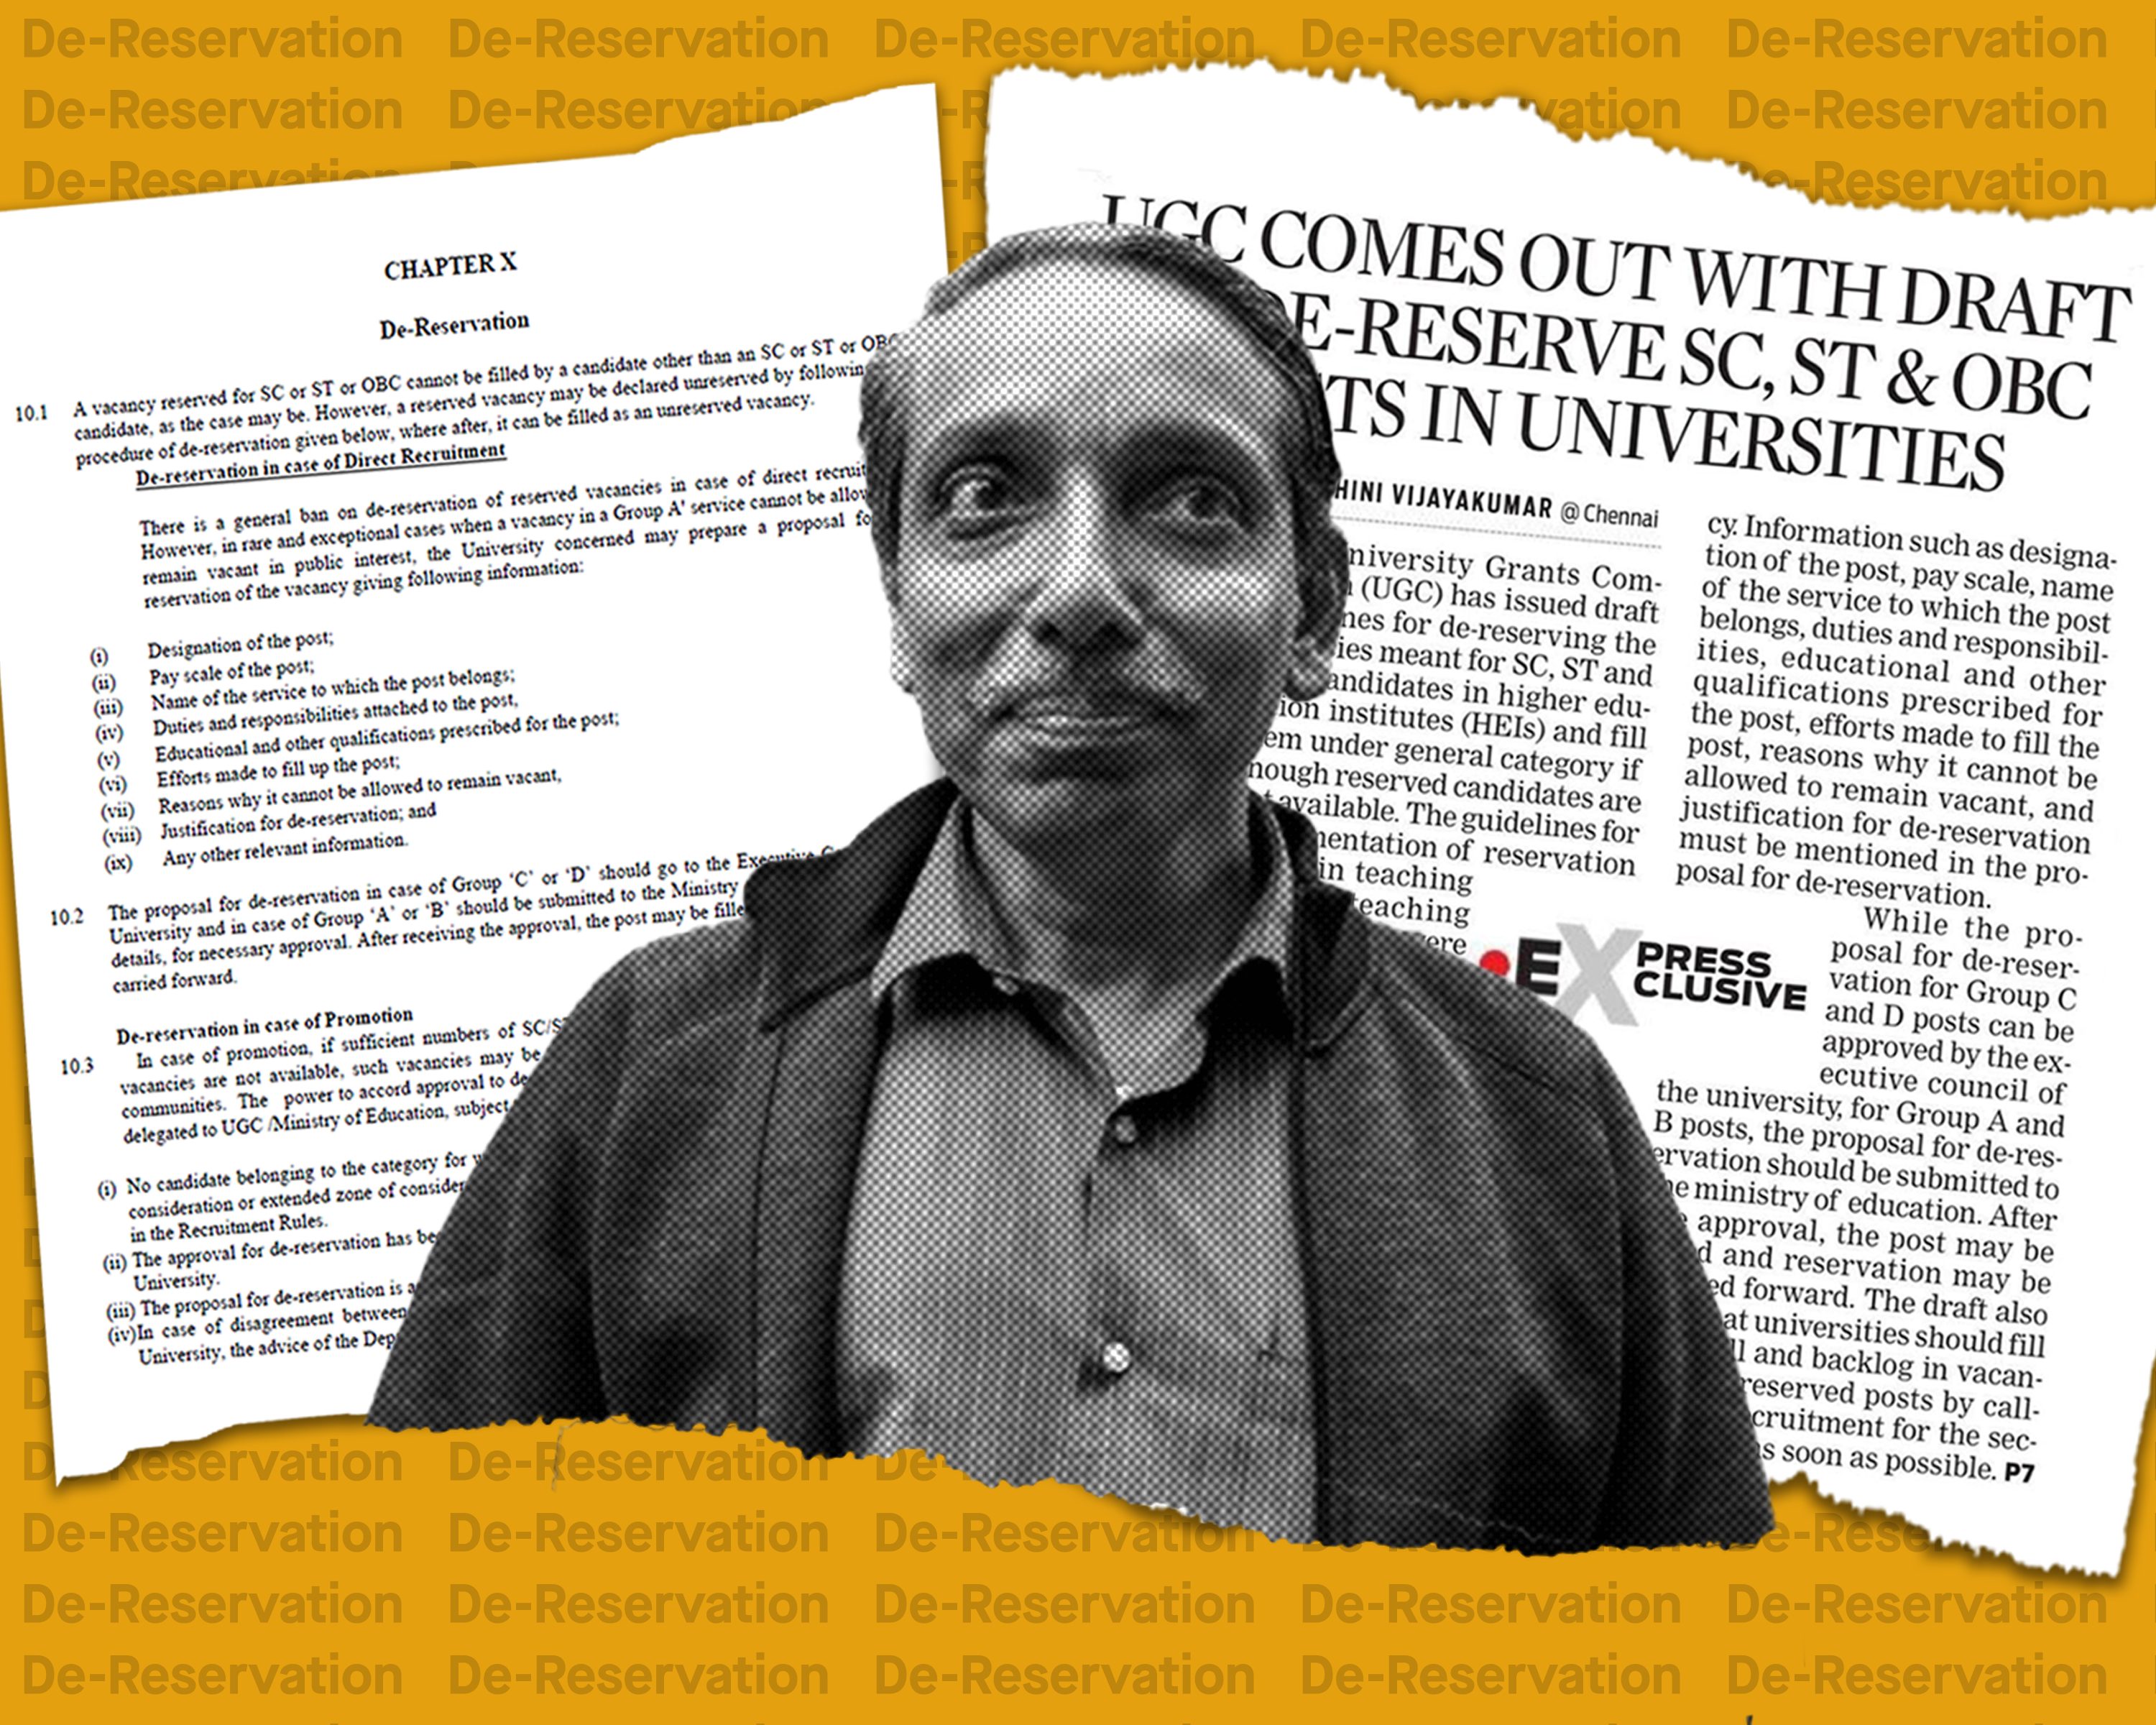 Resist Casteist Policy of “De-Reservation” by UGC